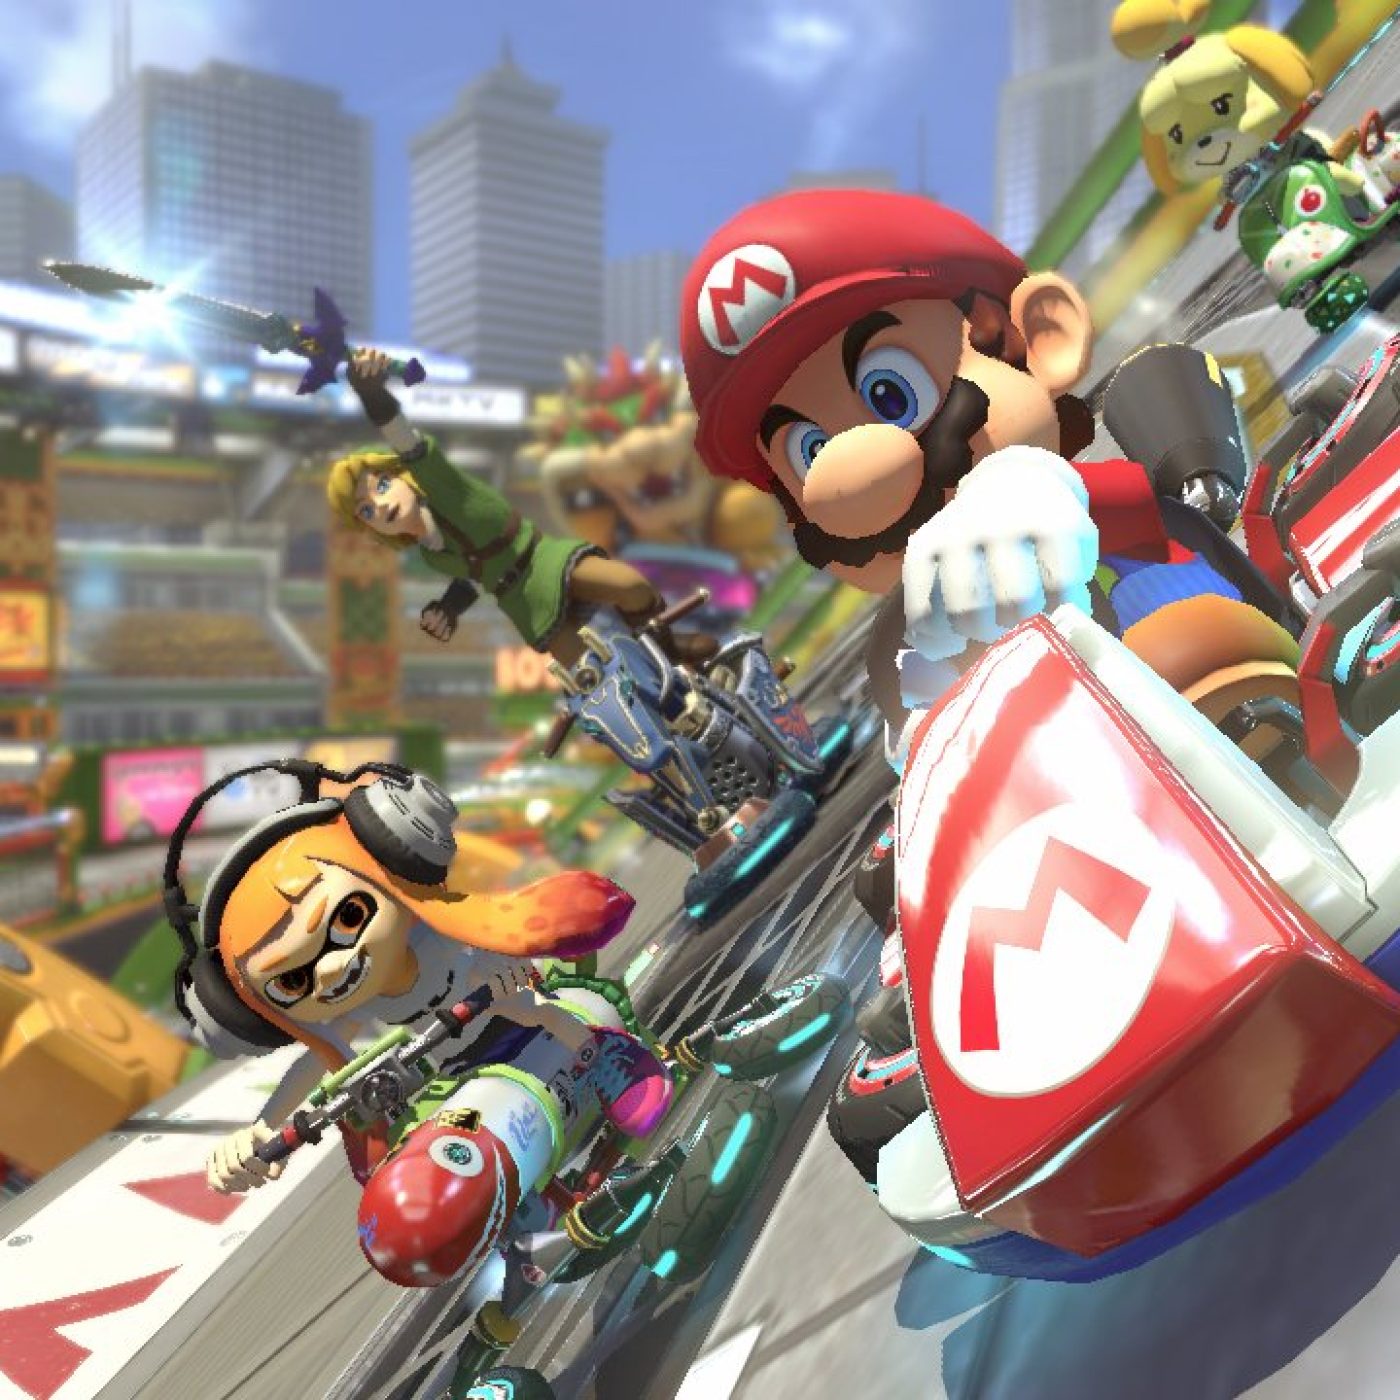 Mario Kart Tour is ending new content drops after October